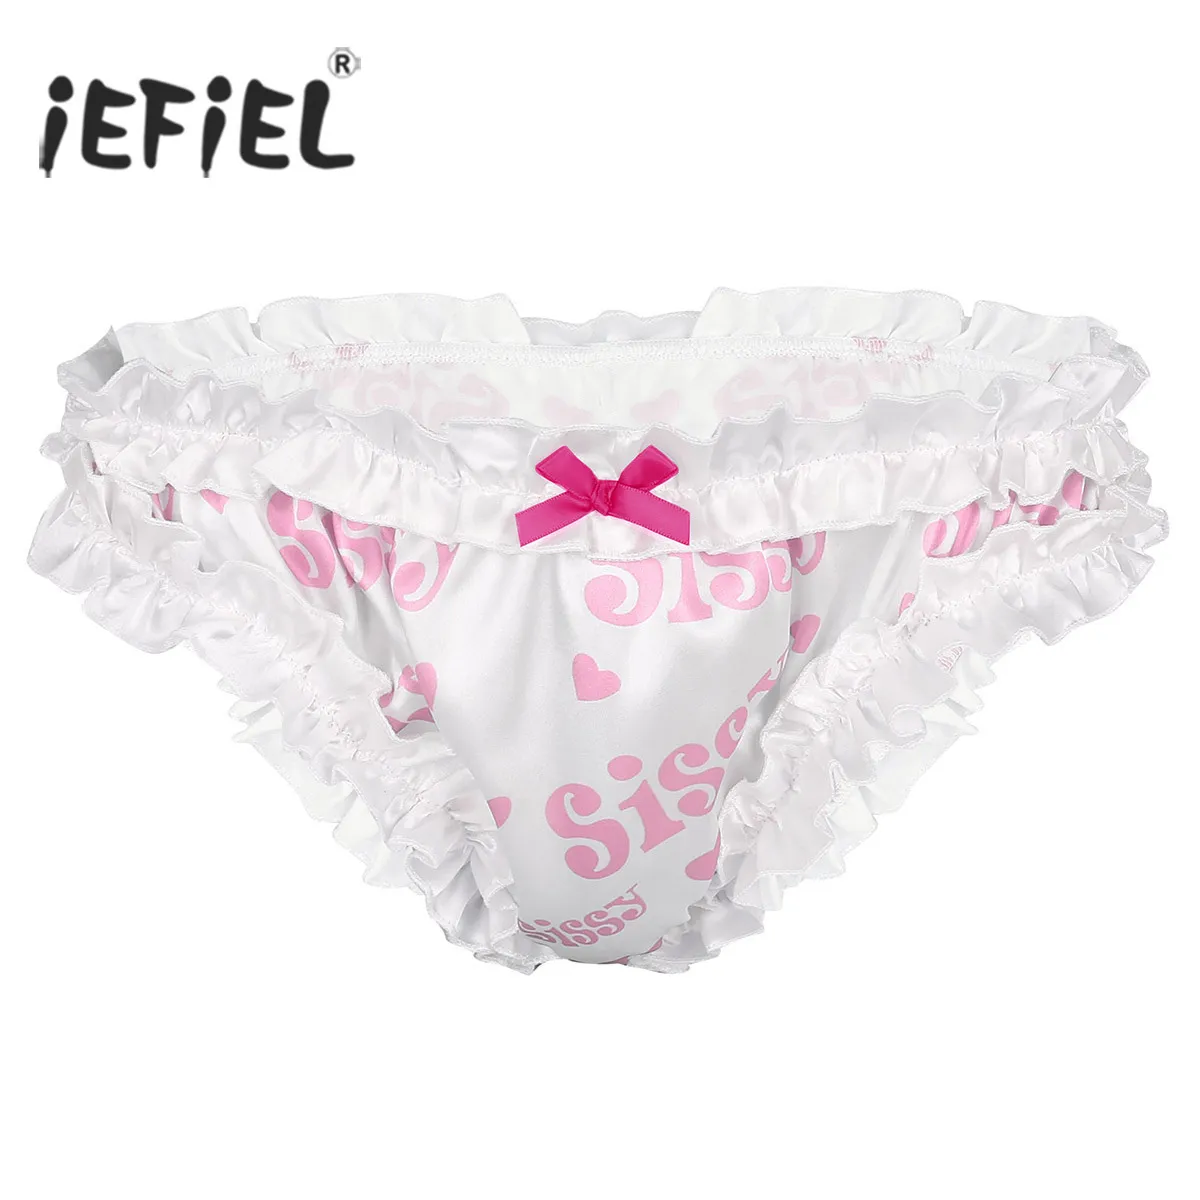 New Mens Sissy Lingerie Gay Male Panties Super Frilly Ruffled Jockstraps High Cut Sissy Knickers Bloomers Briefs Sexy Underwear SH190724